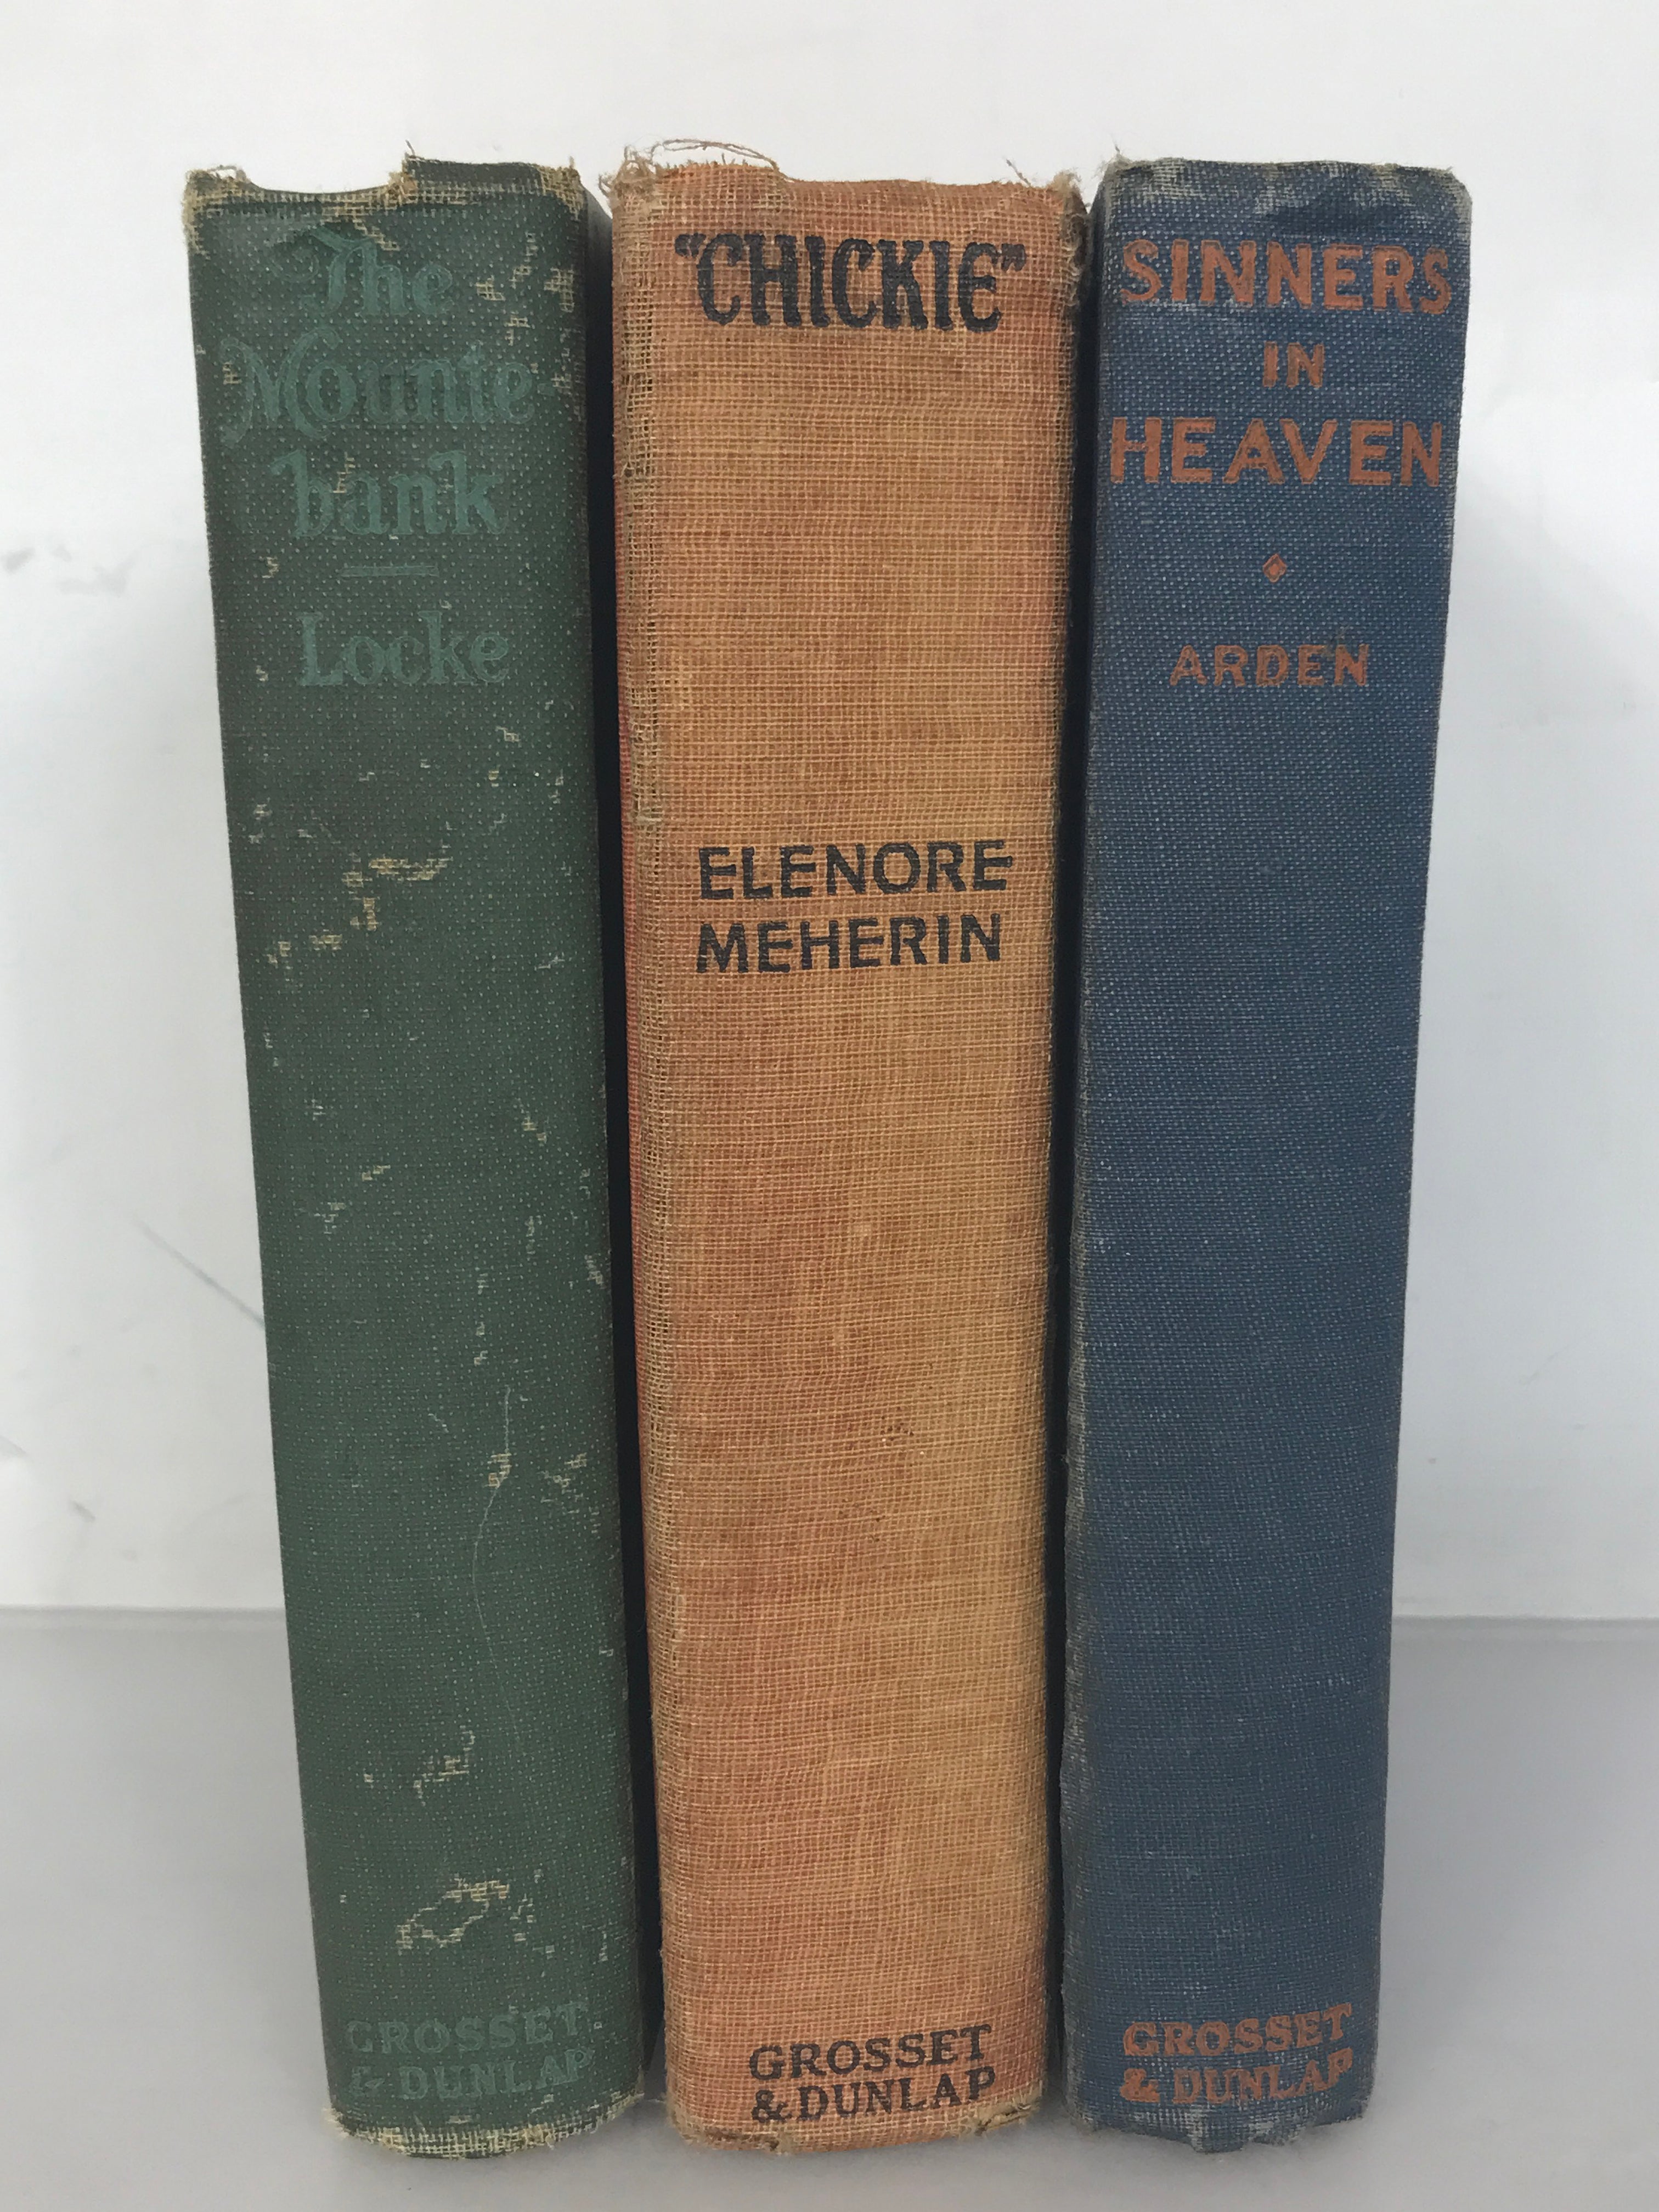 Lot of 3 Novels: Sinners in Heaven, "Chickie", and The Mountebank 1921-1925 HC